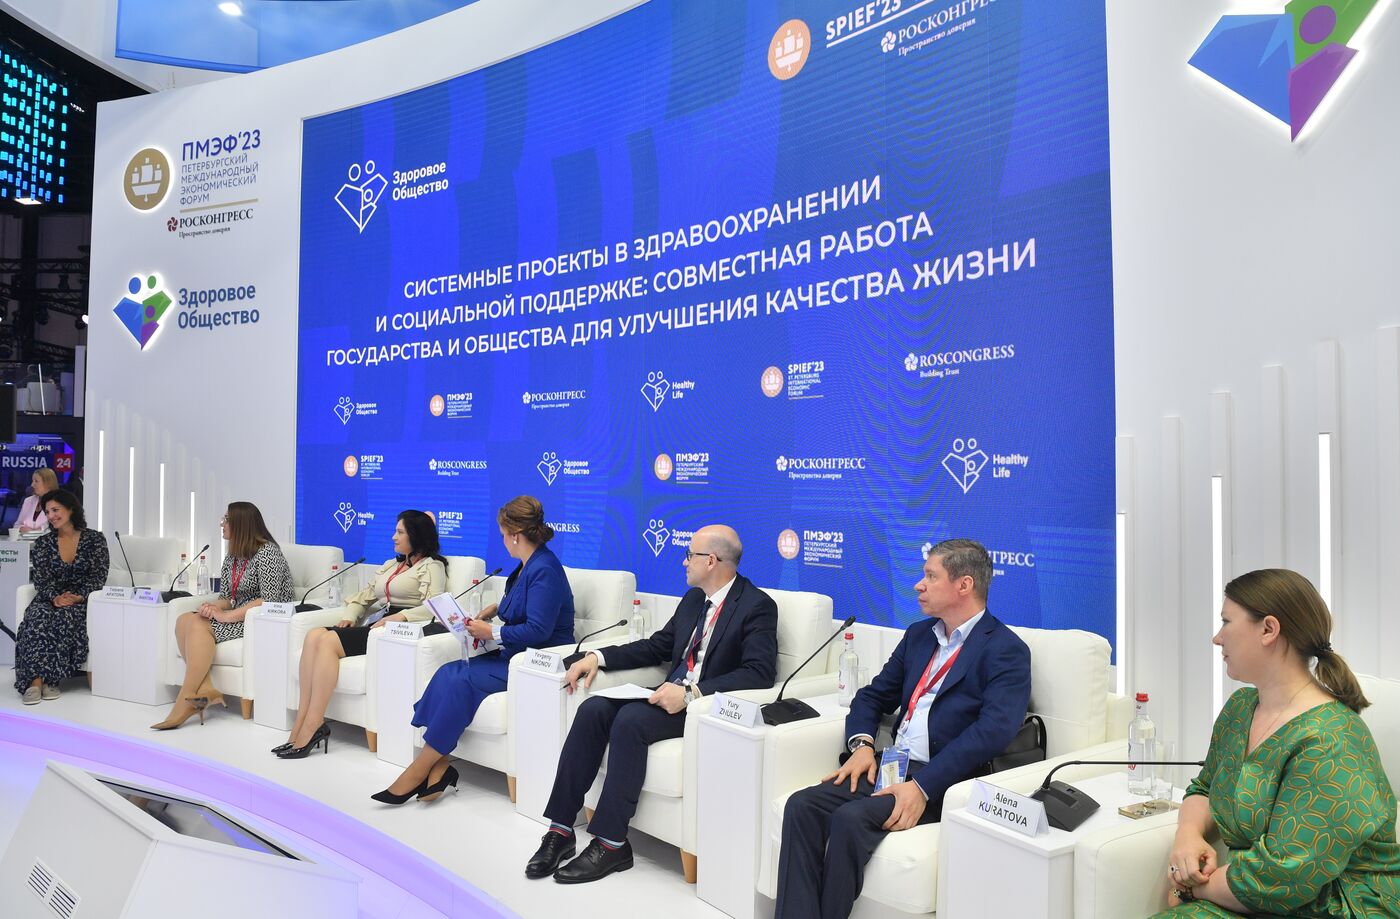 SPIEF-2023. Systems Projects in Healthcare and Social Support: The State and Society Working Together to Improve Quality of Life